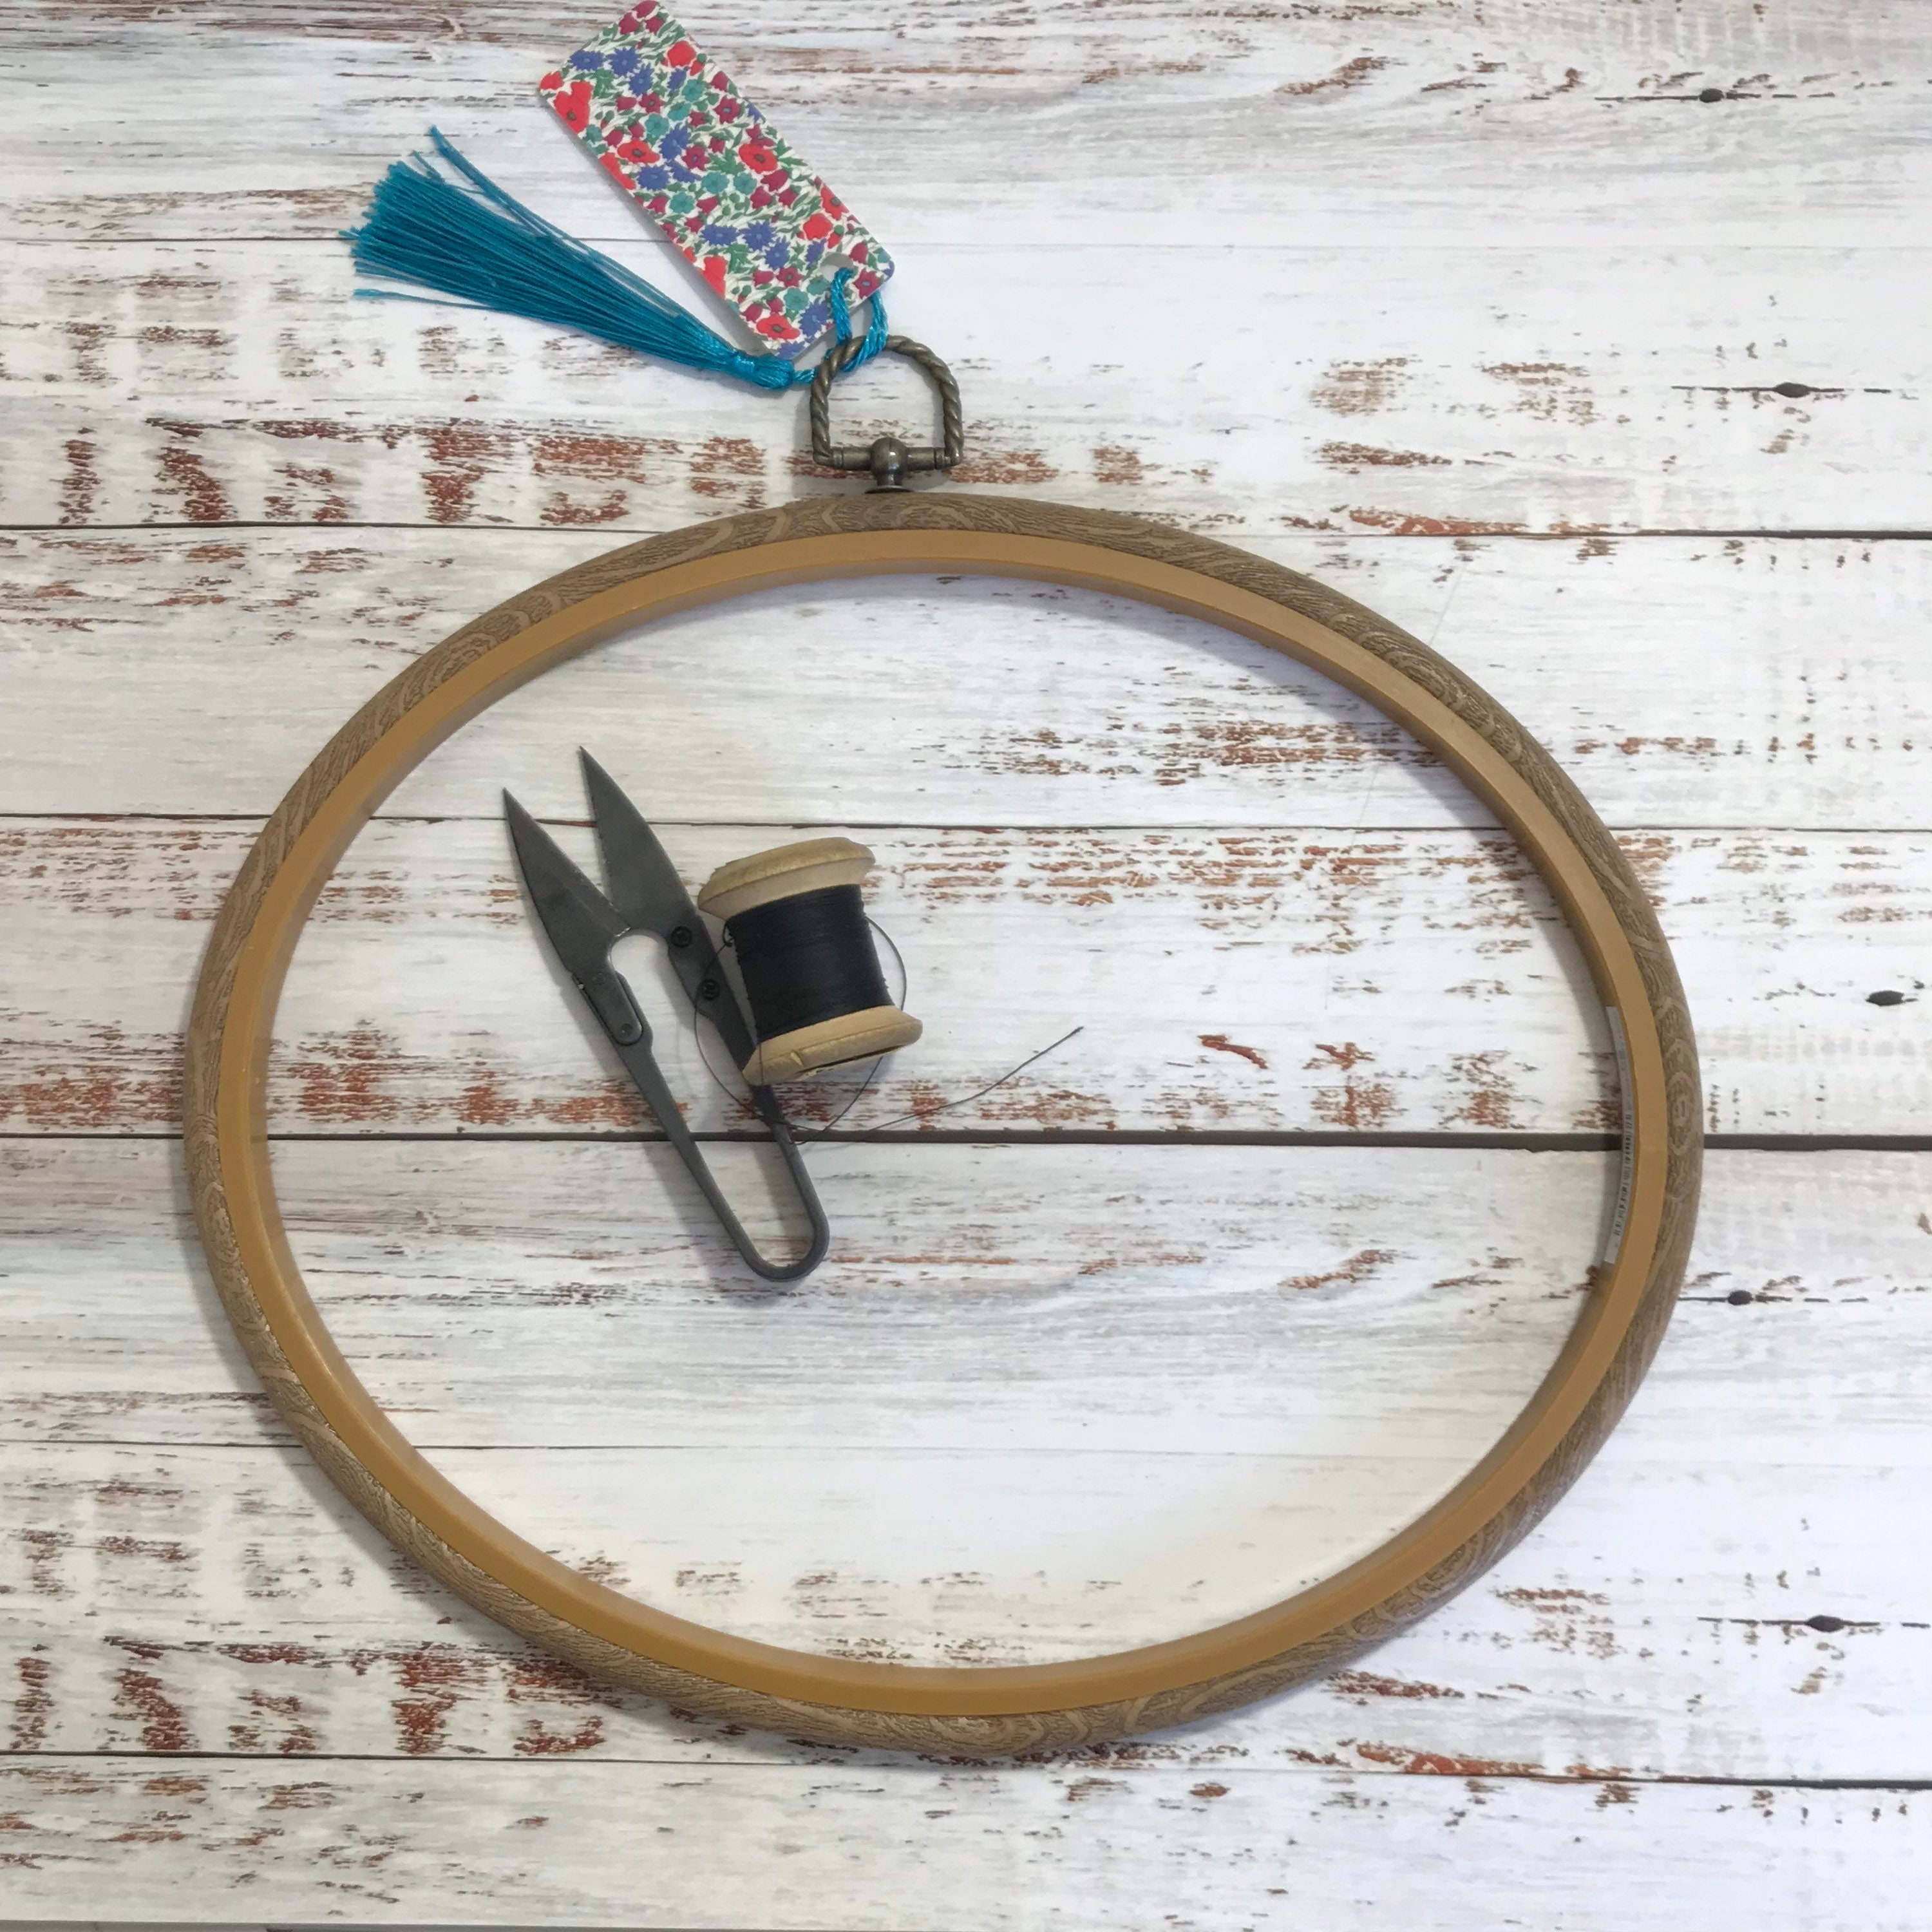 Mini Embroidery Hoop. Small Flexible Plastic Hoop. 2.5 Round Circle. Gift  for Artist. Art Supply. Colorful Stitching Accessory. Travel Kit 